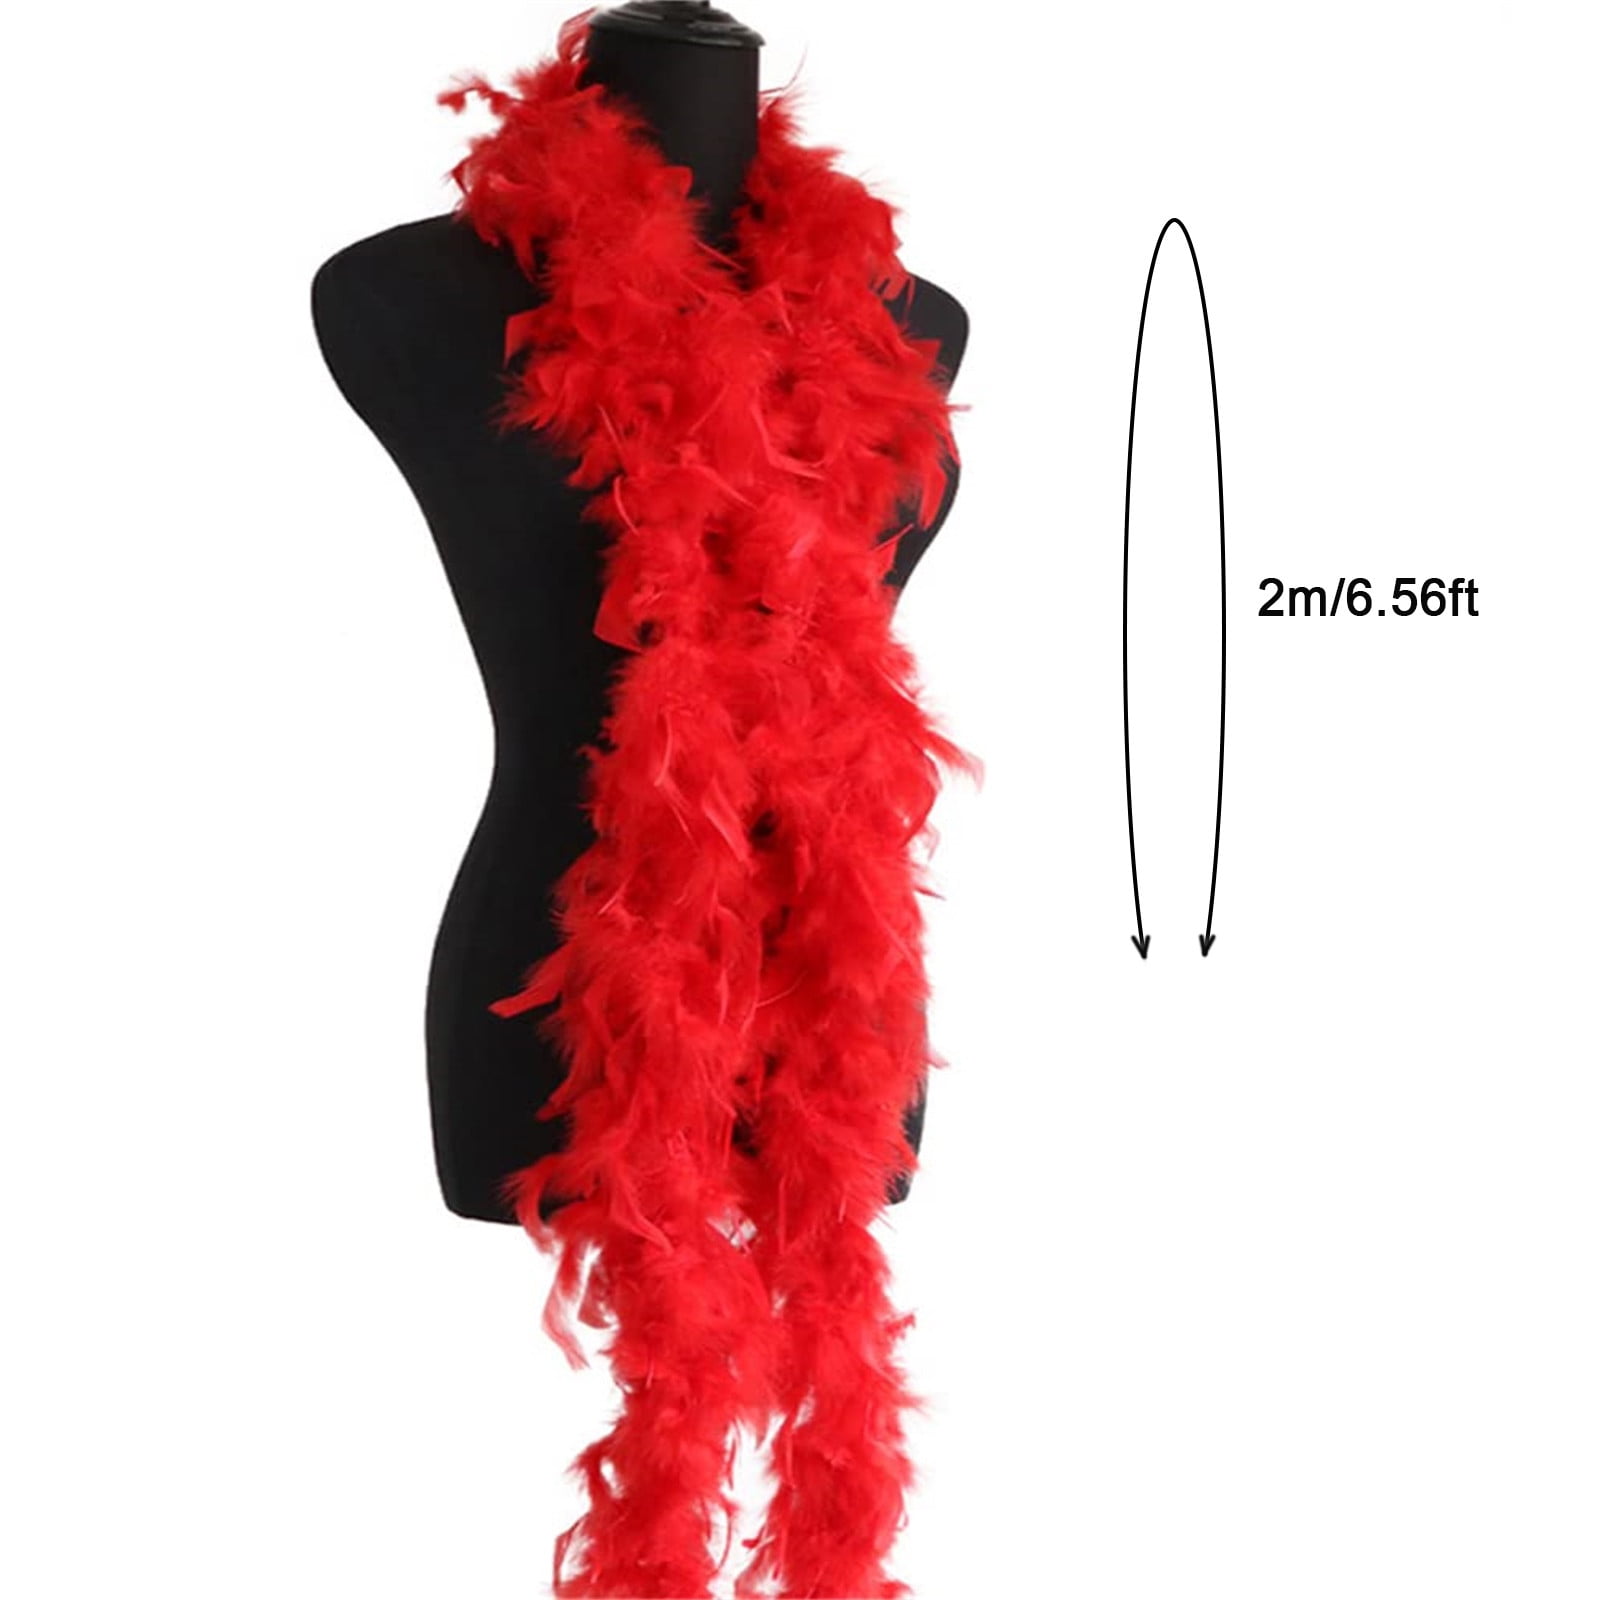 Feather Boas With Heart Rimless Sunglasses4 Ft Feather Boa For